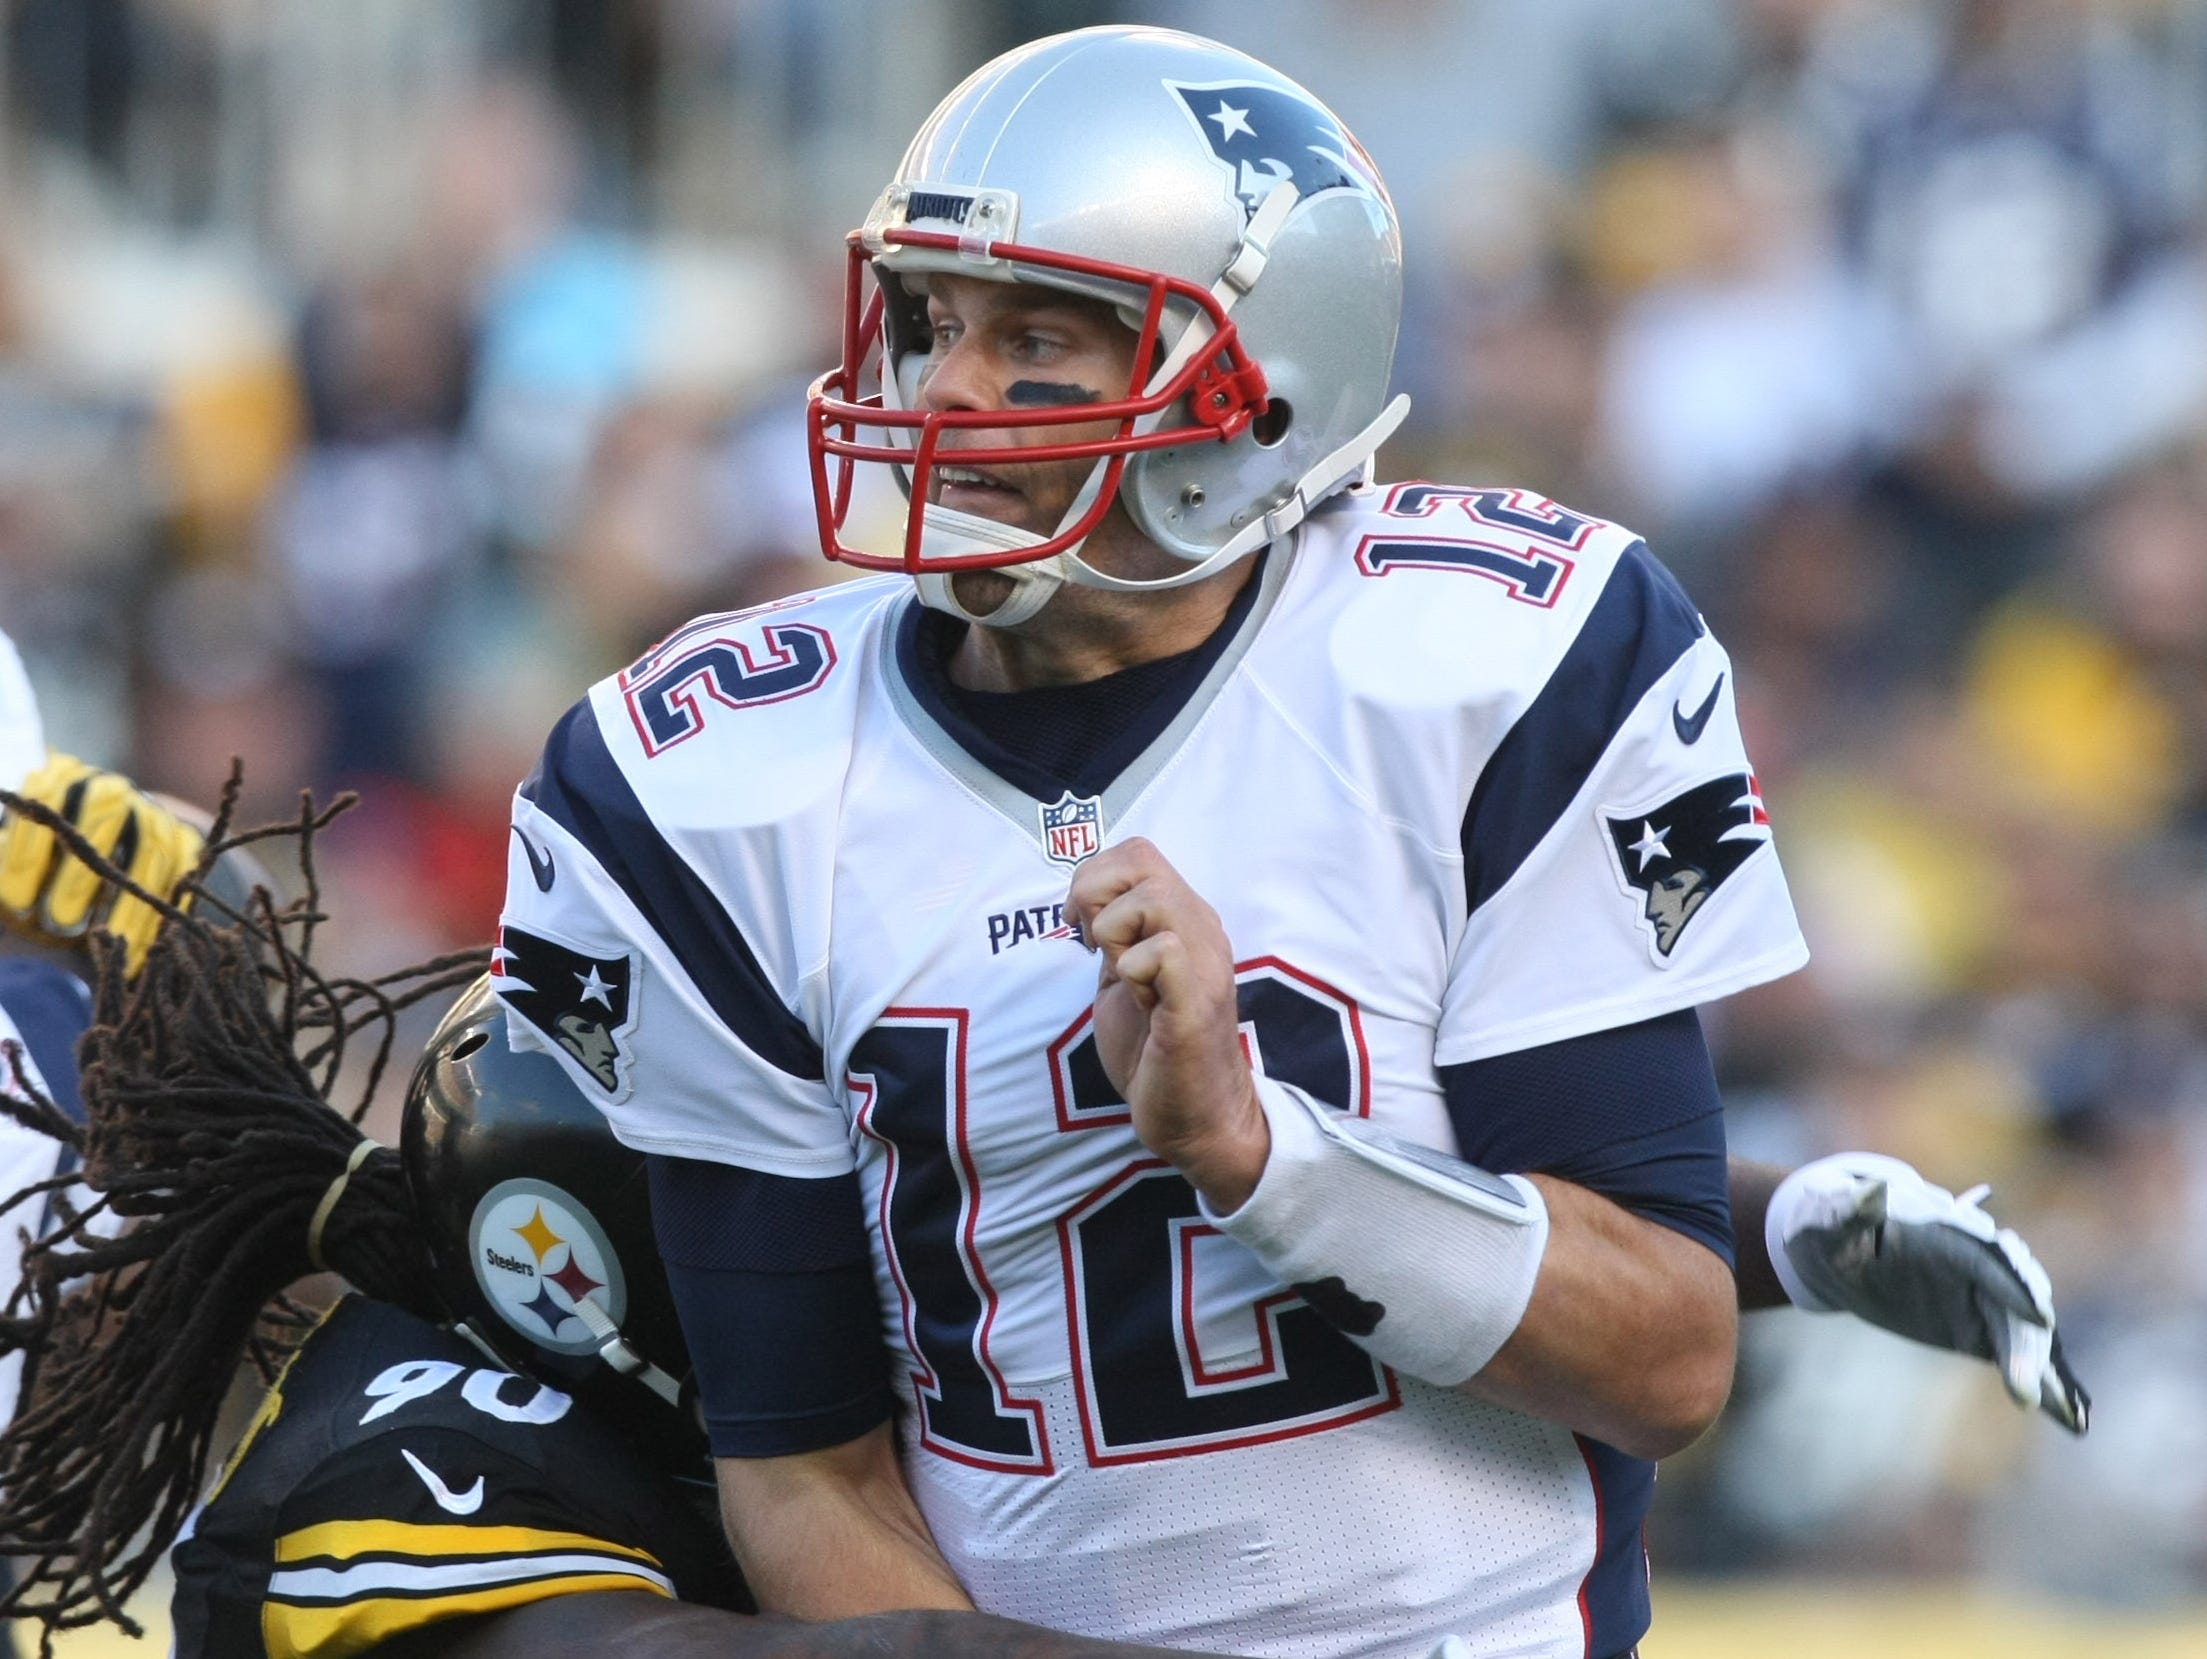 Patriots QB Tom Brady didn't have one of his best games Sunday.